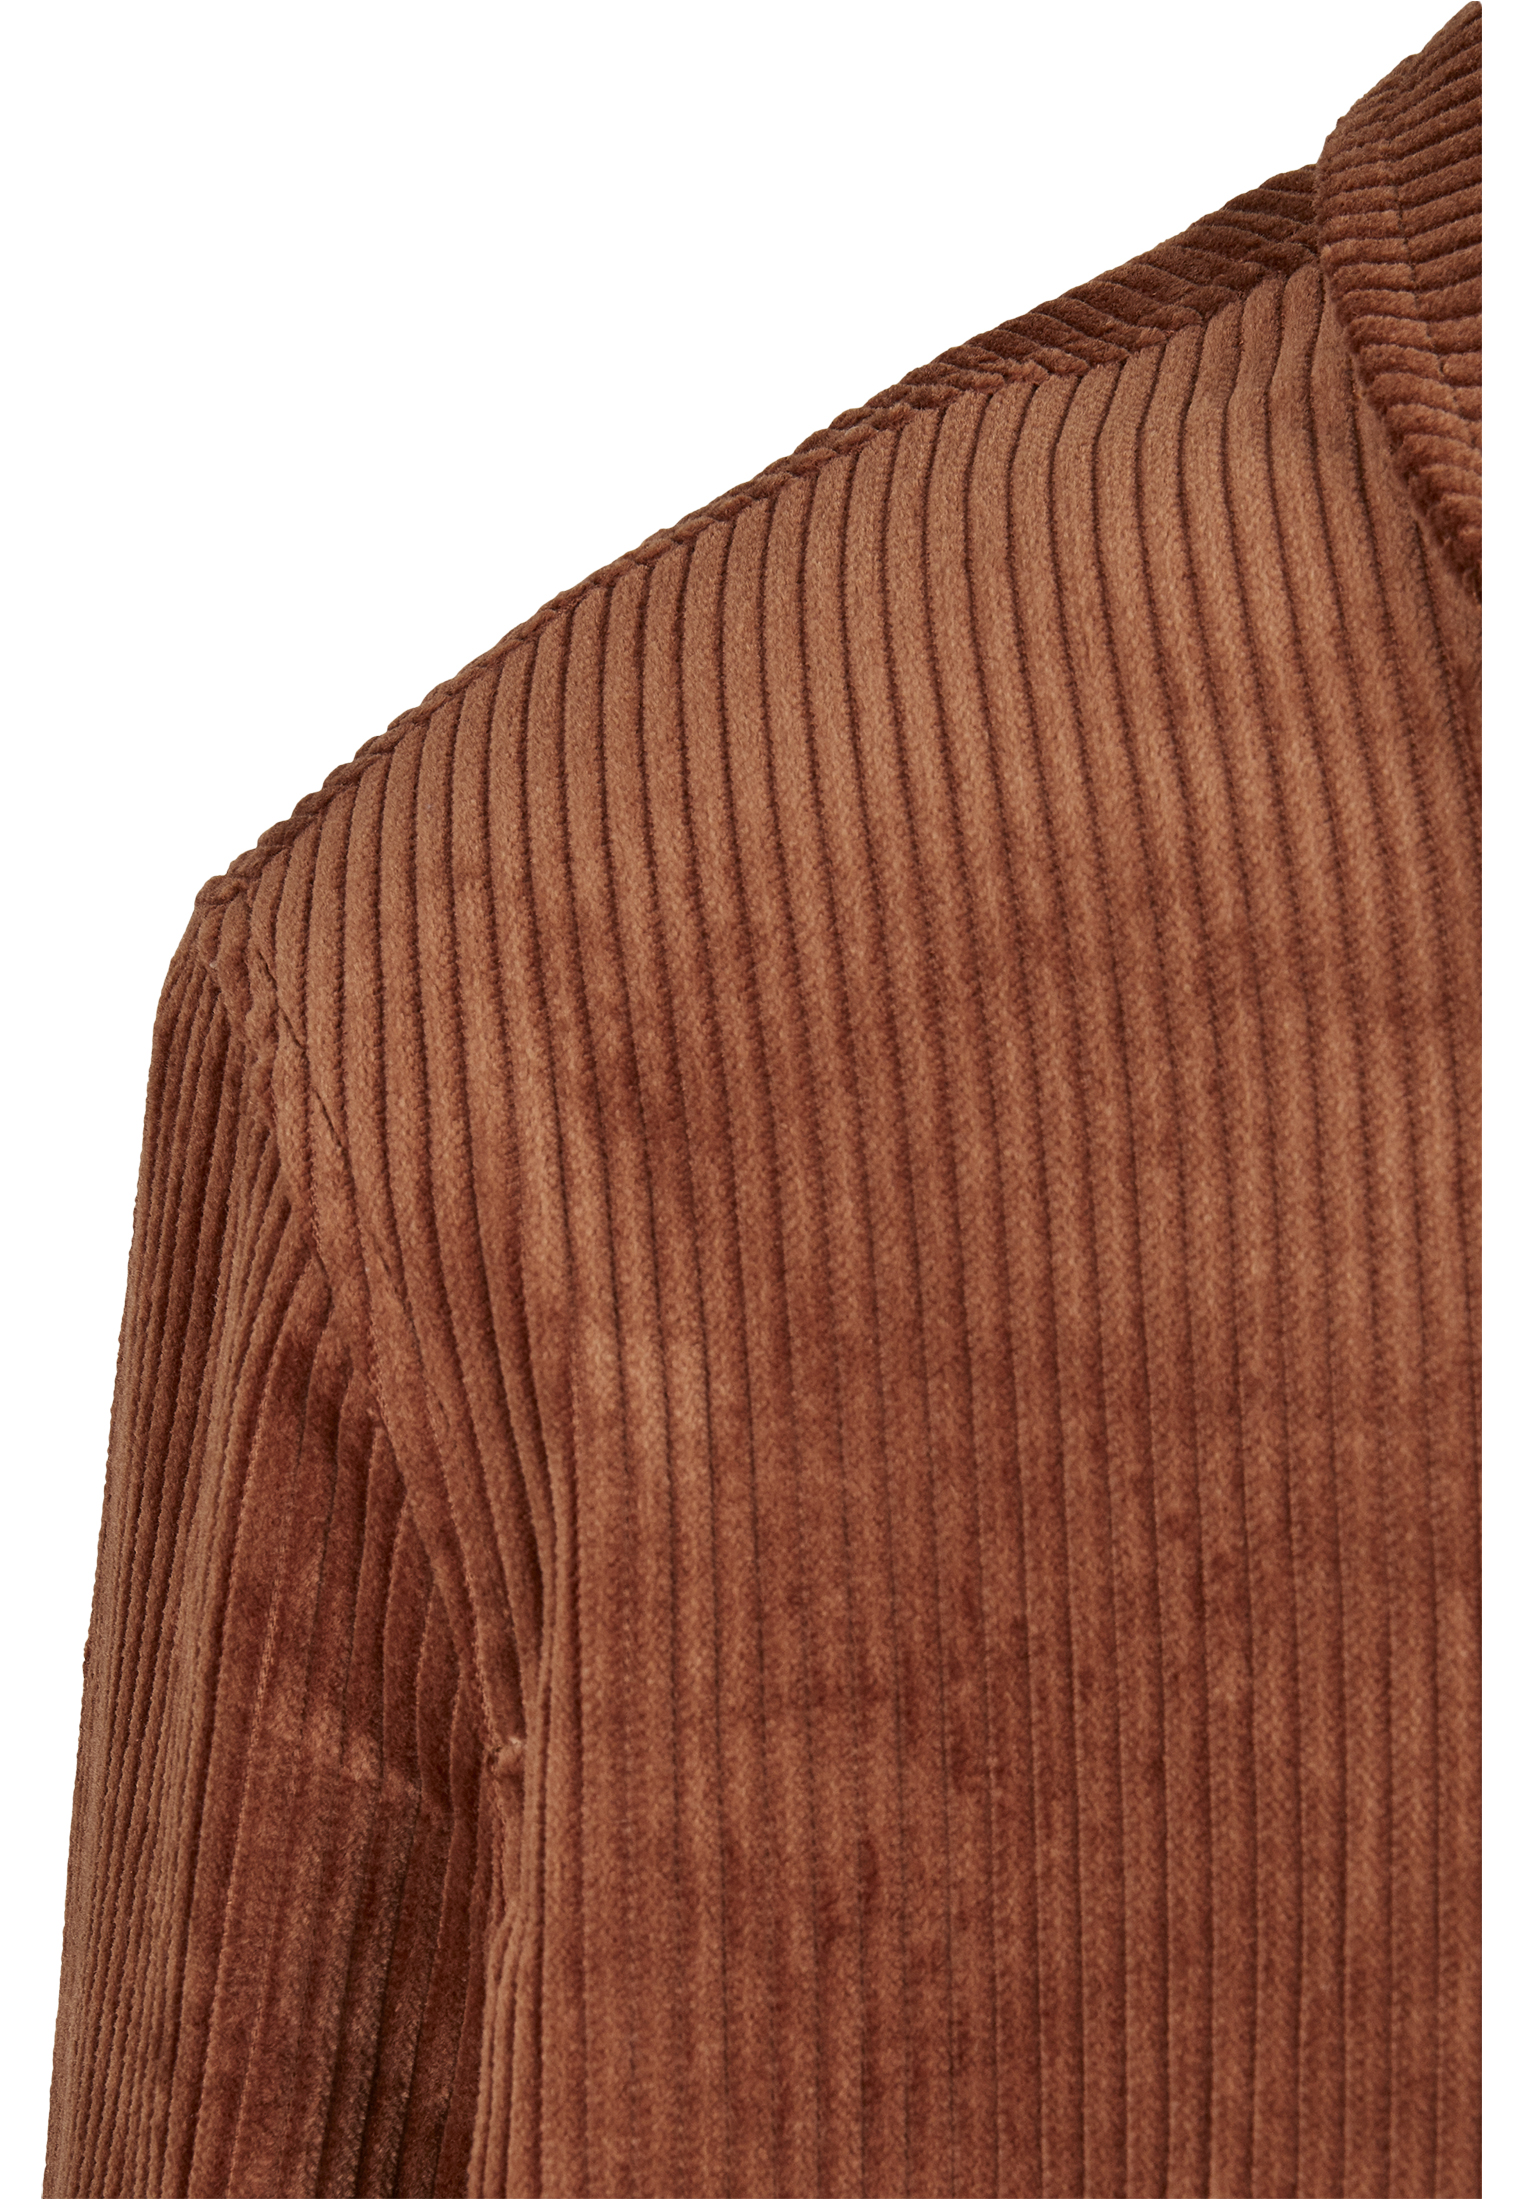 Light Jackets Boxy Corduroy Jacket in Farbe toffee